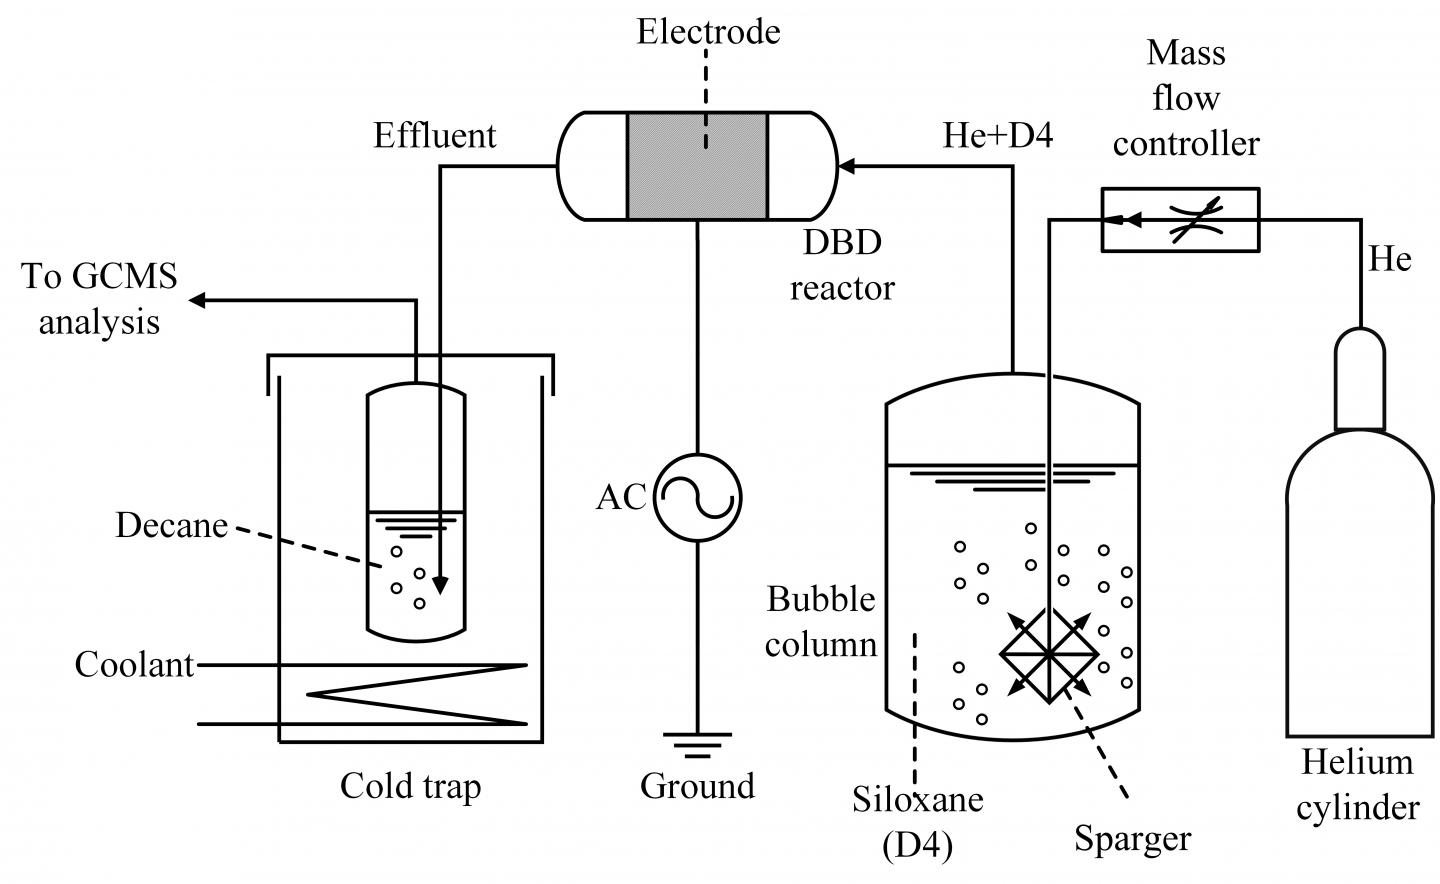 Schematic of the Experimental Setup of Siloxane Removal from a Carrier Gas